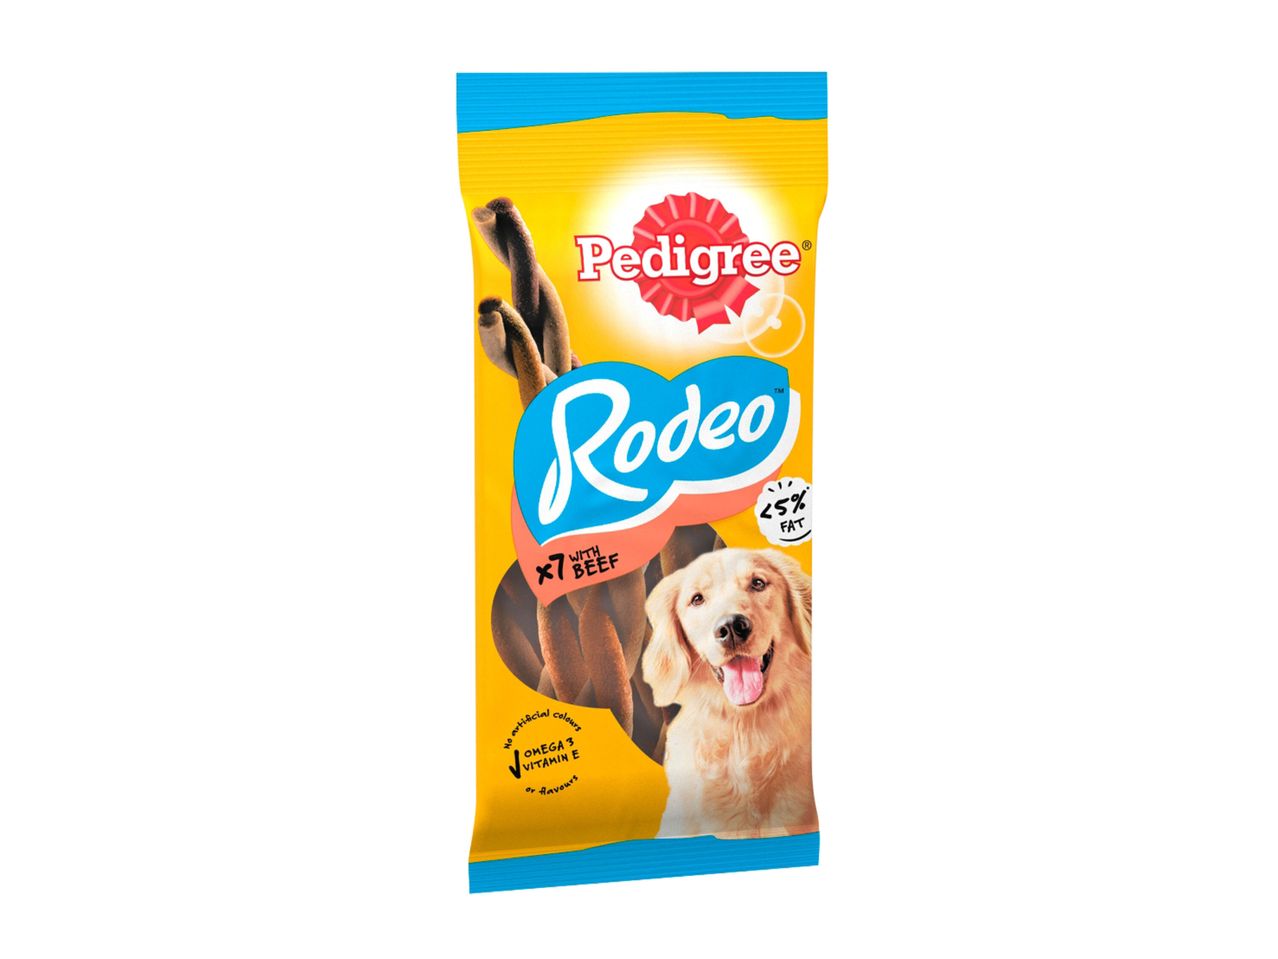 Go to full screen view: Pedigree Rodeo Snacks - Image 1